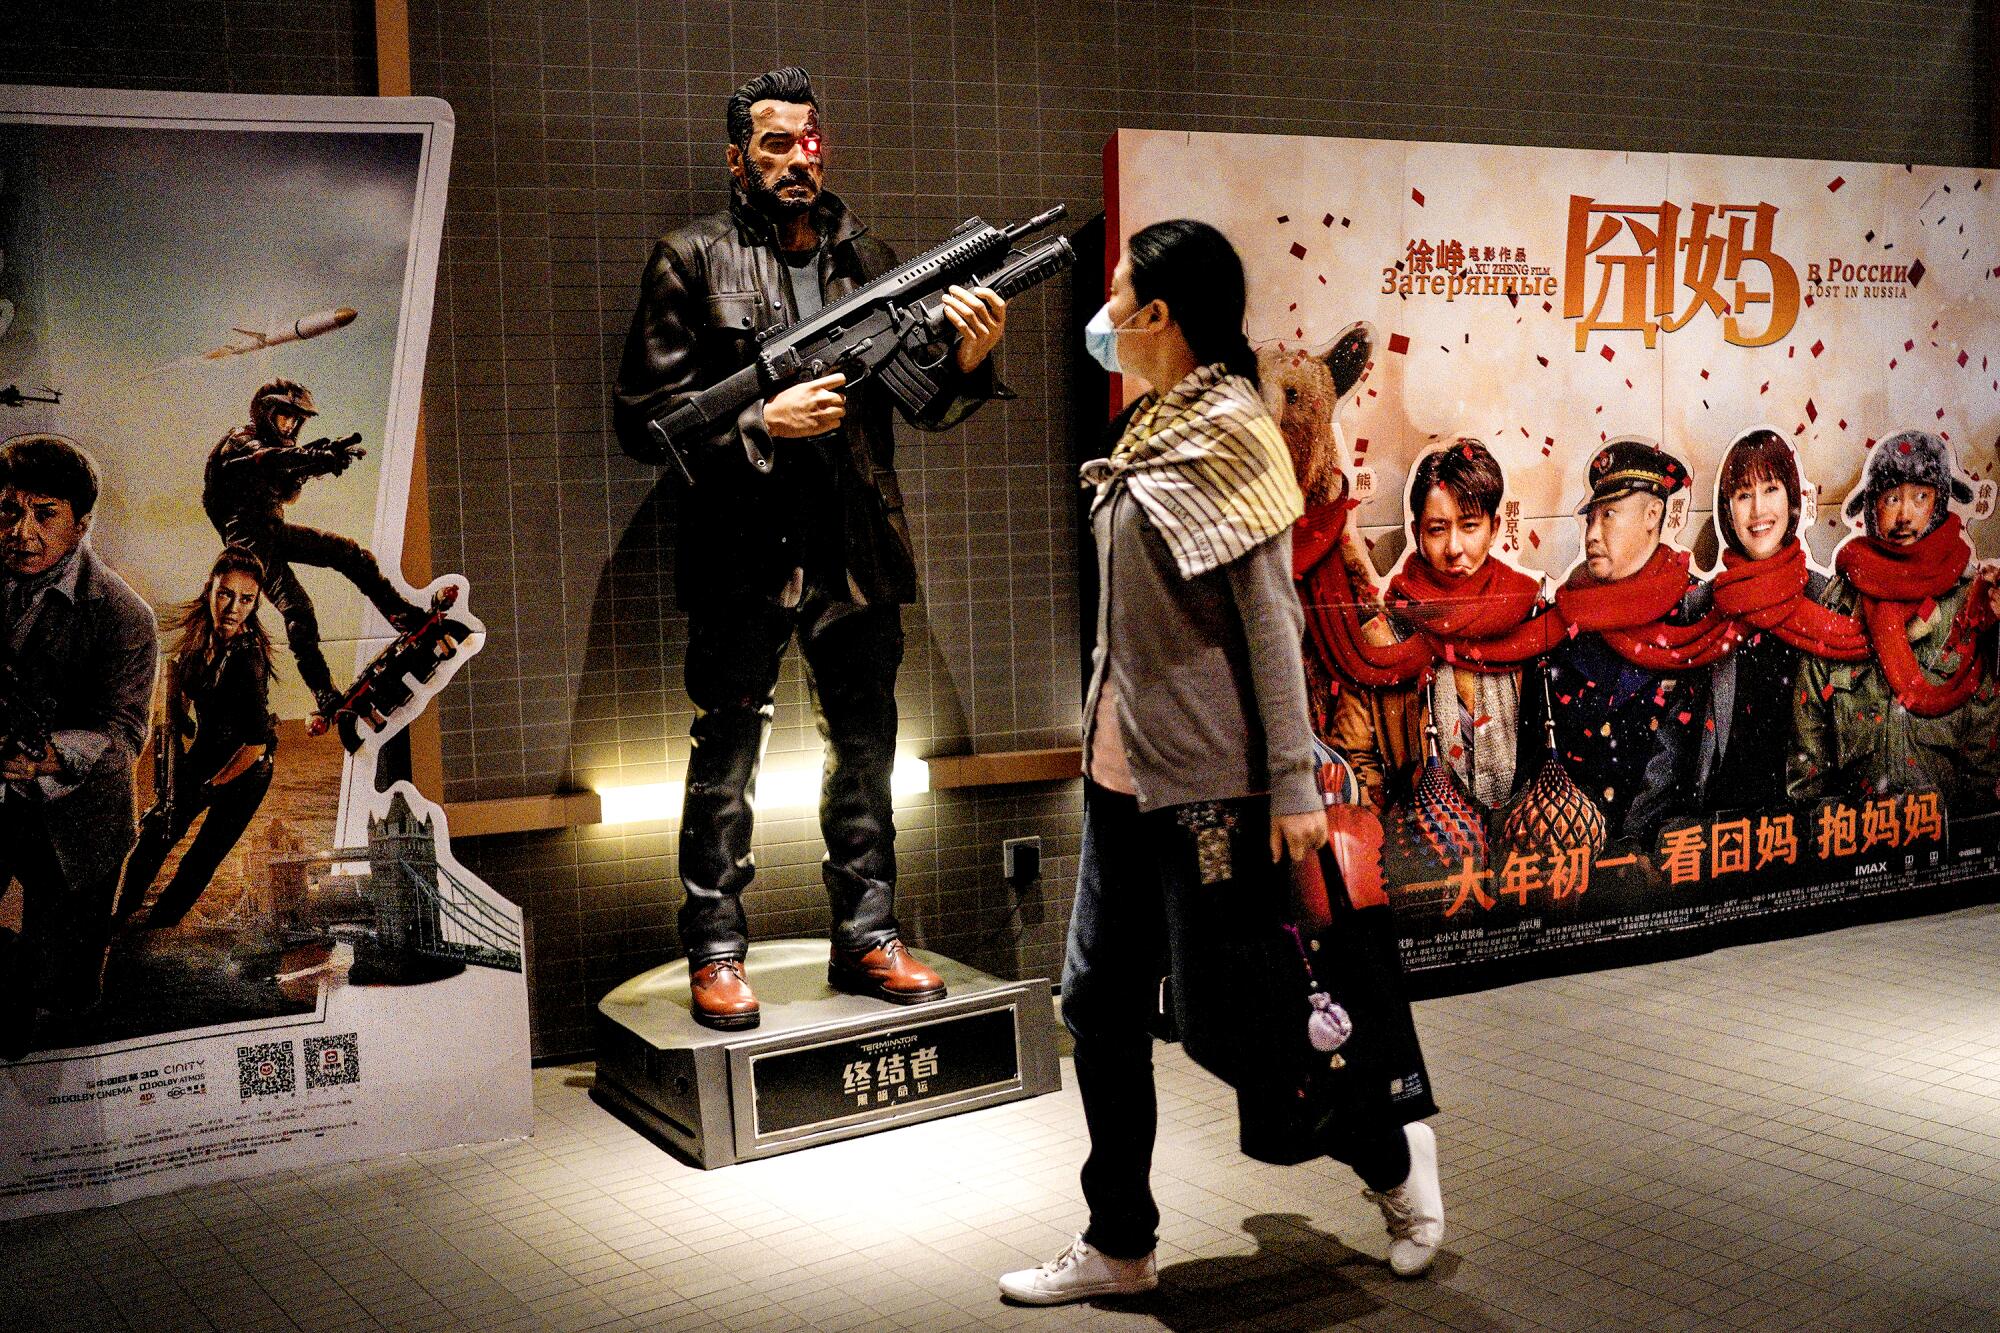 A woman in a mask walks by movie posters and a full-size figure of a film character holding a weapon.